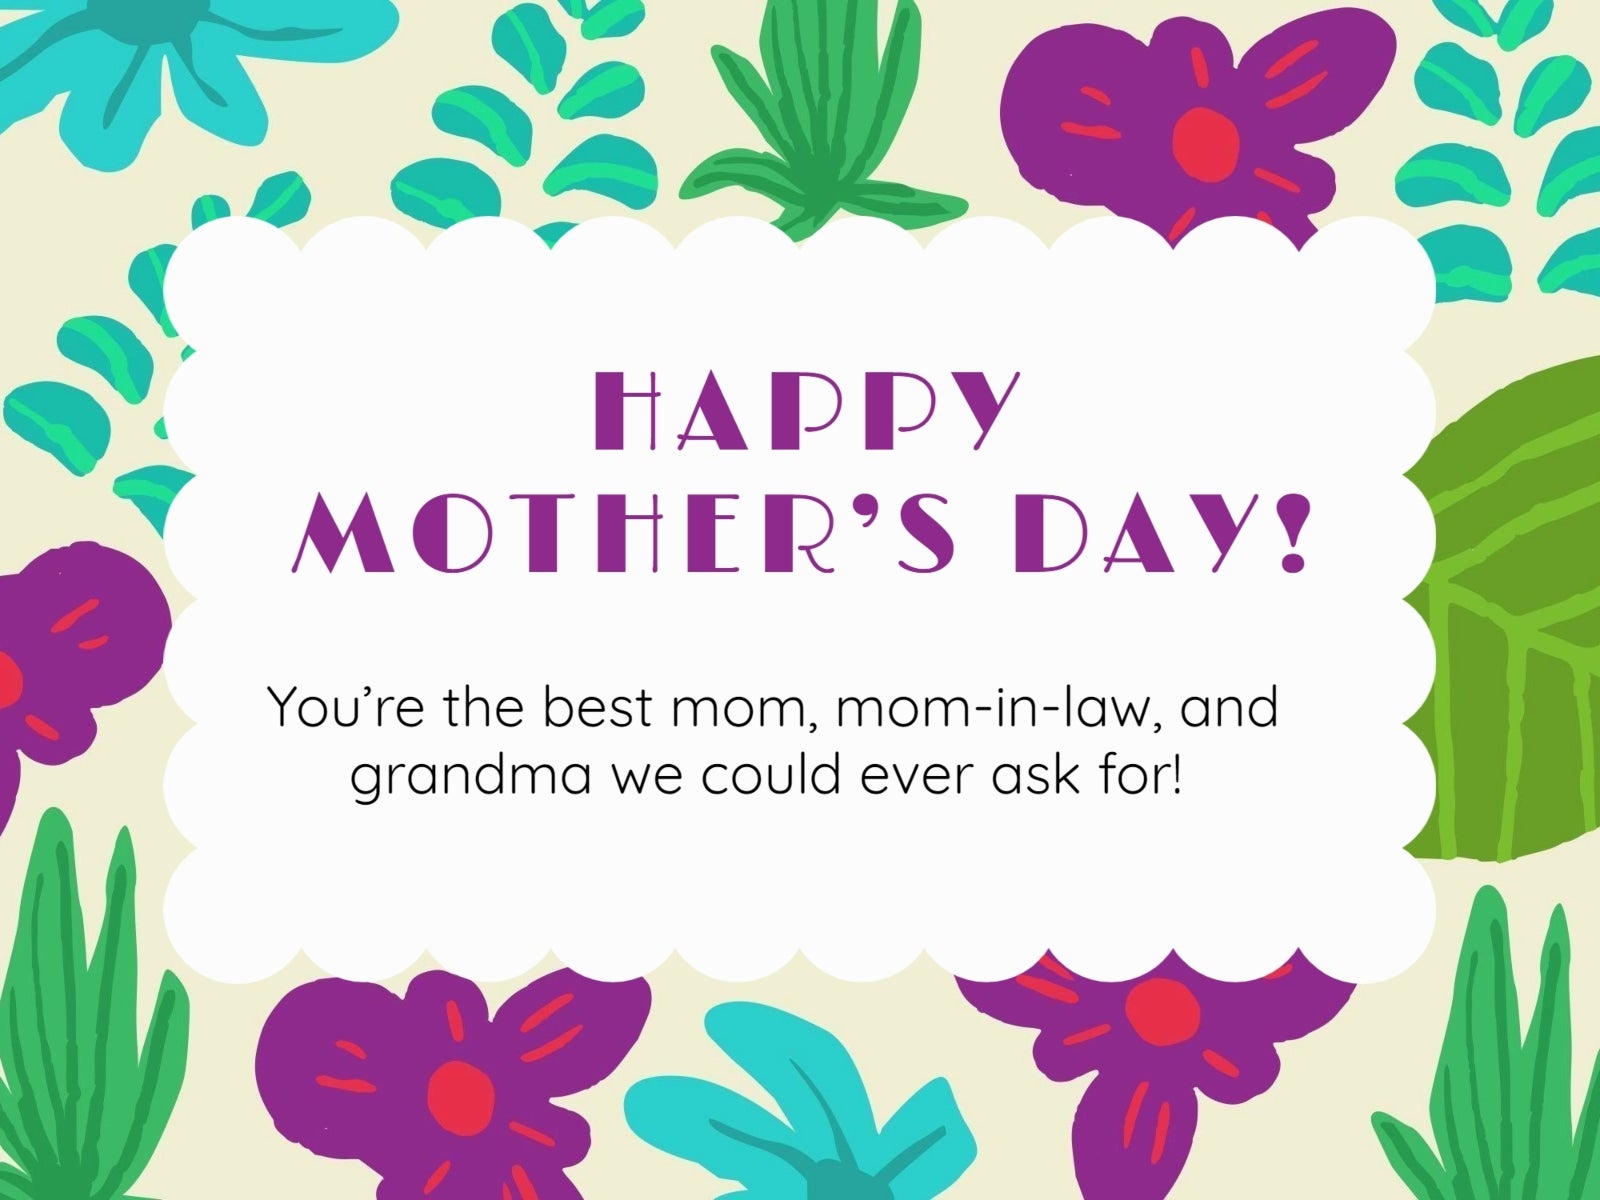 beverly higdon recommends stepmom mothers day quotes pic